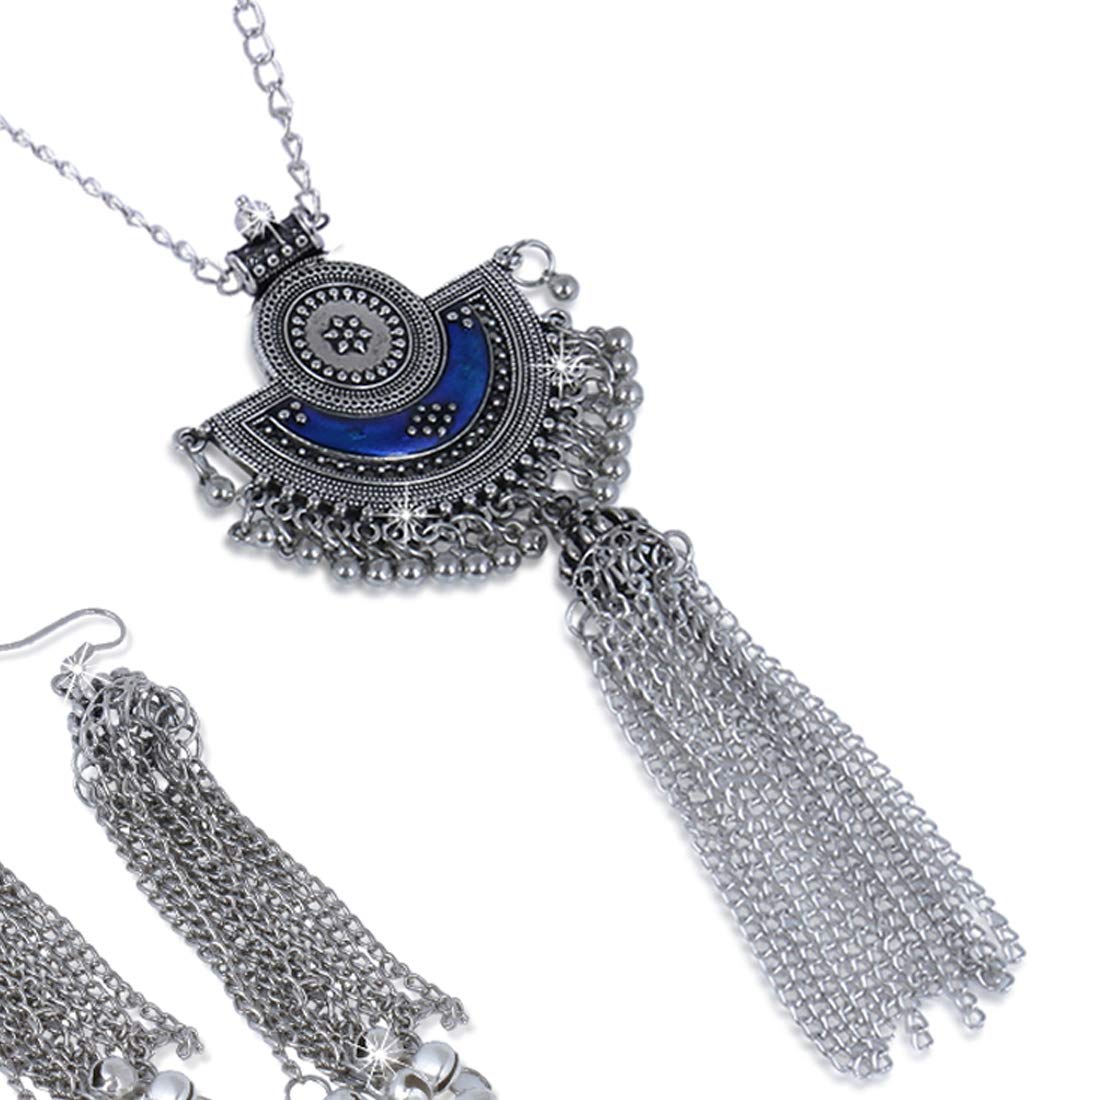 Yellow Chimes Stylish Crafted Royal Blue Meenakari Oxidized Silver Necklace Set with Earrings Oxidized Jewellery Sets for Women and Girls